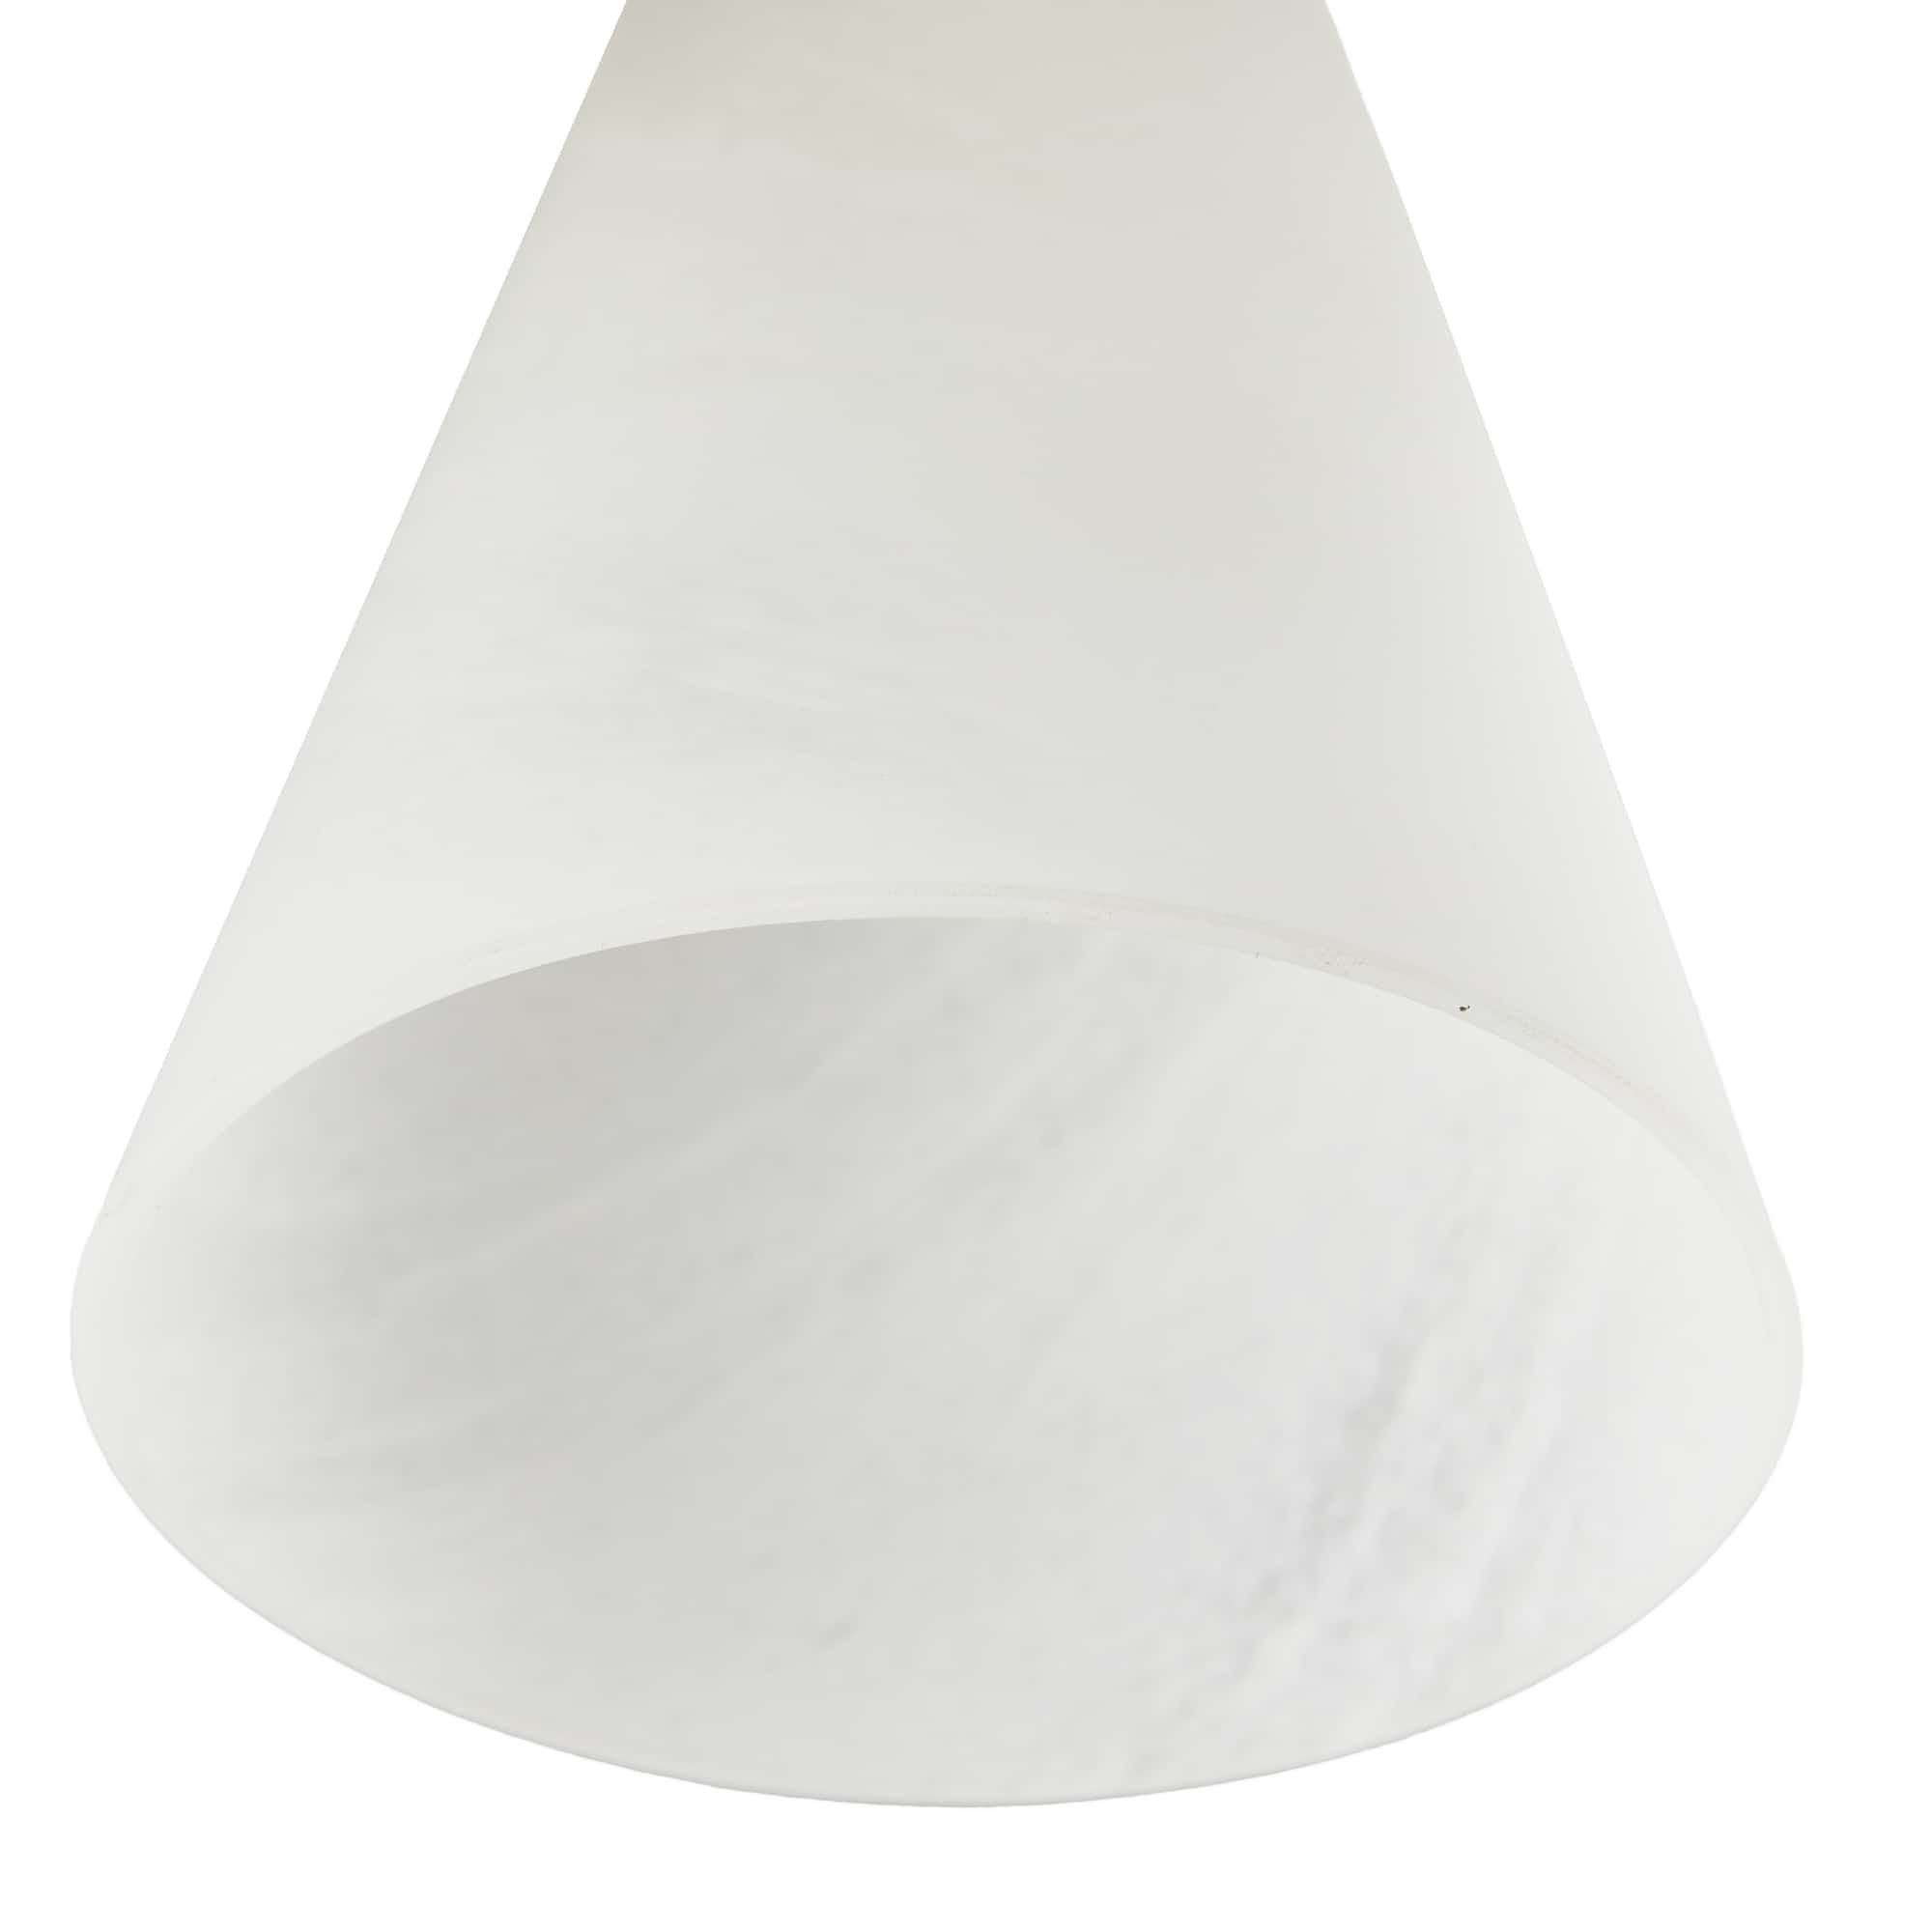 Ceiling lamp SHAUNA by Arteriors